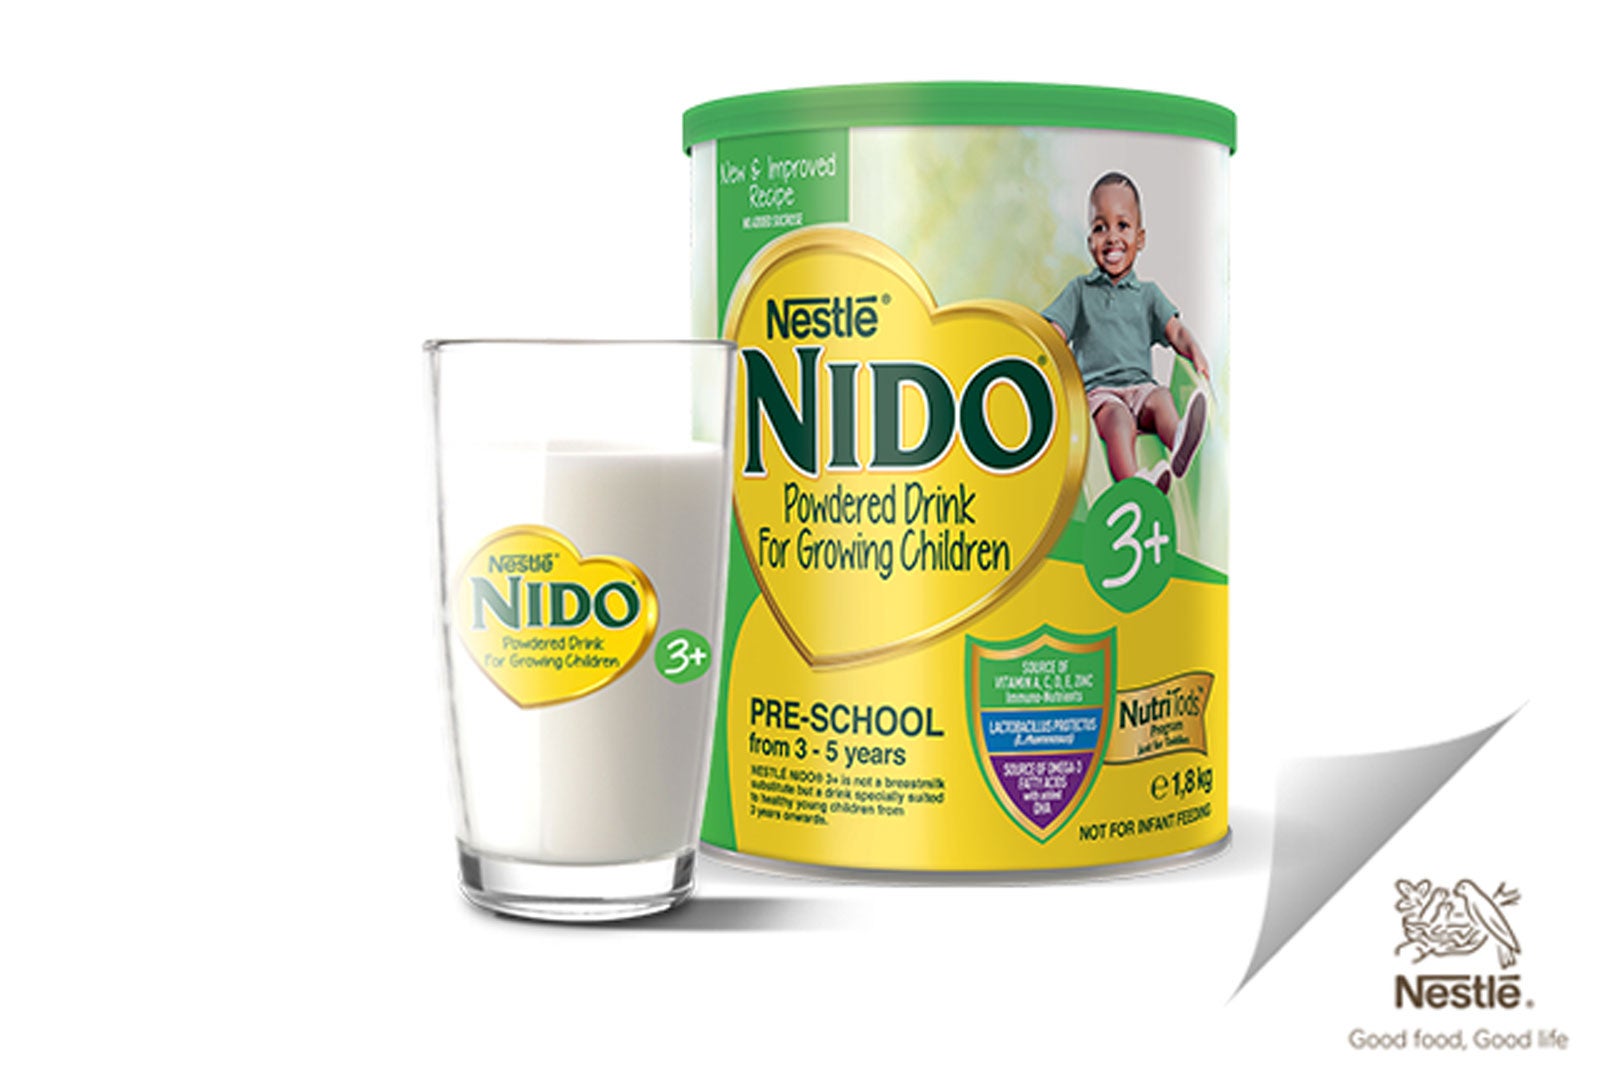 Nido 3 plus product and a glass of milk with product's logo.